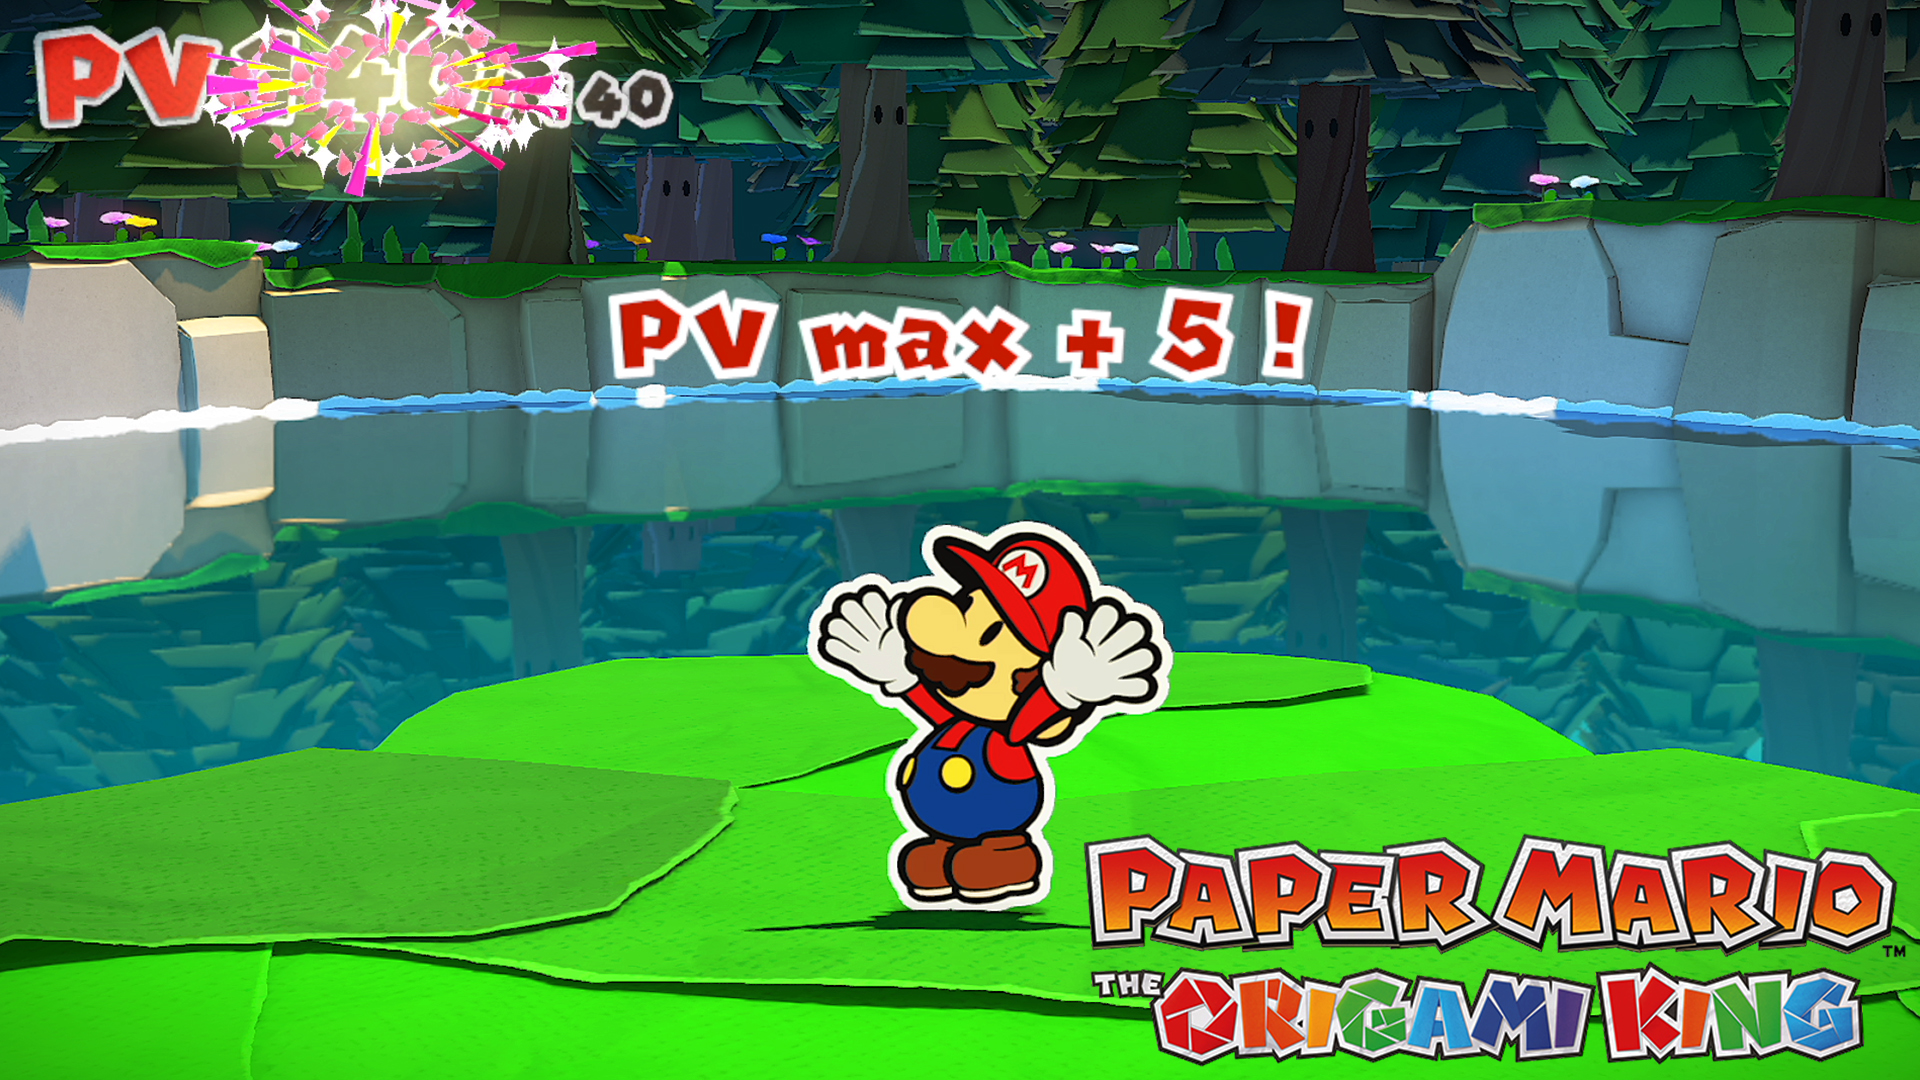 Paper Mario The Origami King max HP hearts, where to find them, their usefulness our